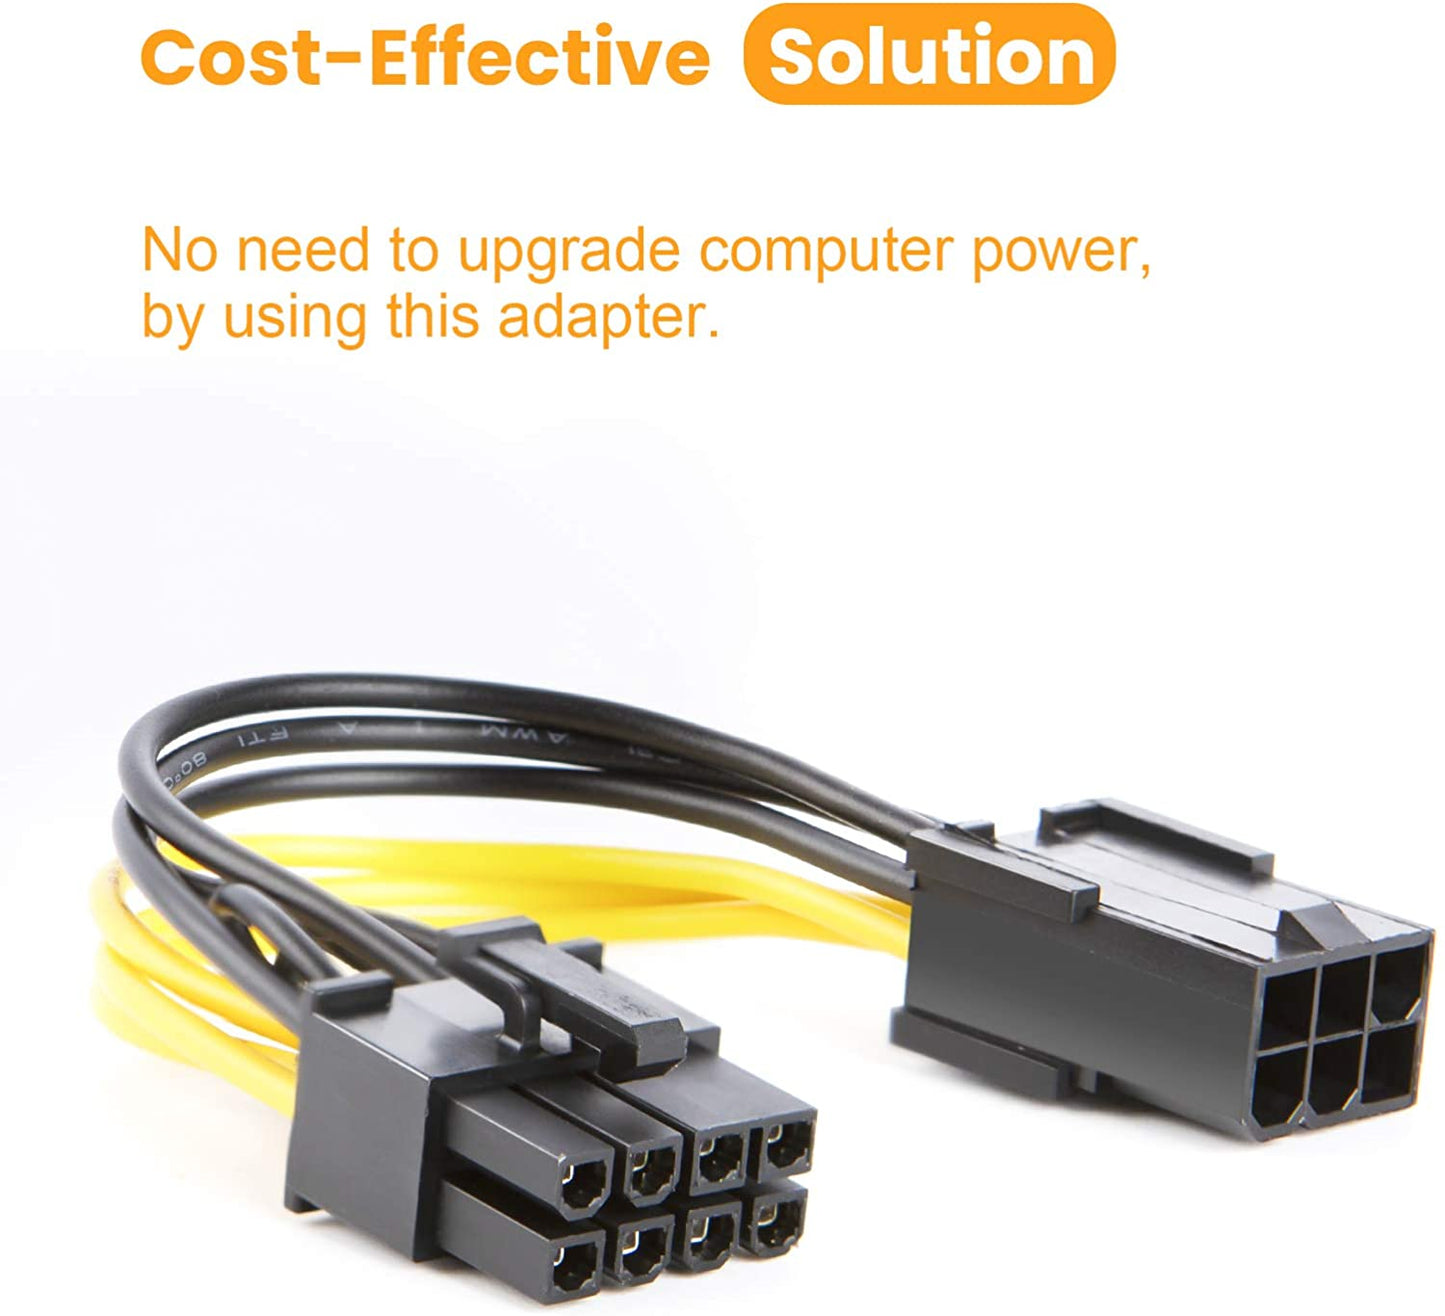 6pin female to 8pin (6+2) male PCIe Power Adapter Cable